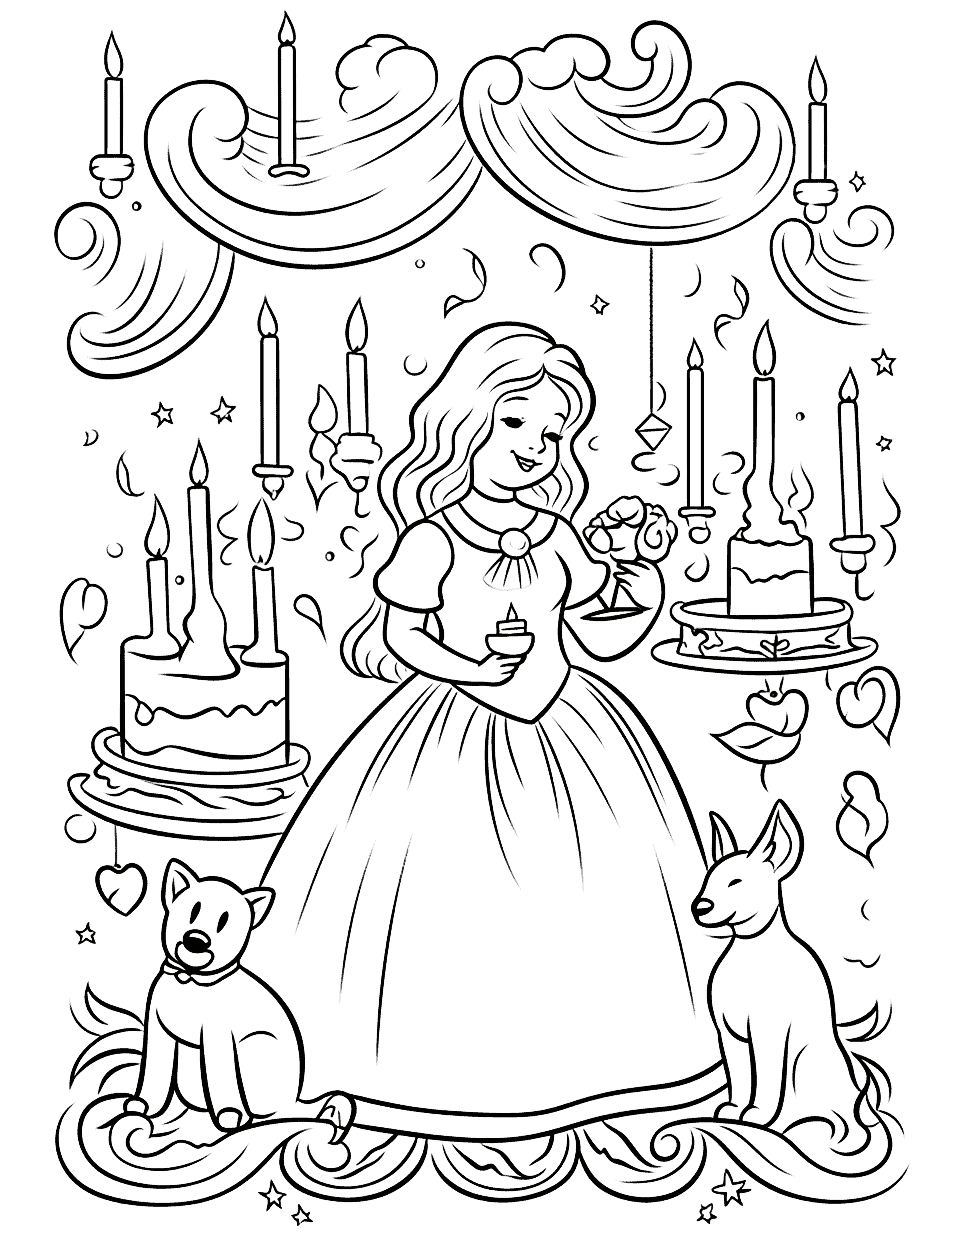 Cinderella's Midnight Birthday Happy Coloring Page - Cinderella celebrating her birthday with her animal friends before the clock strikes midnight.